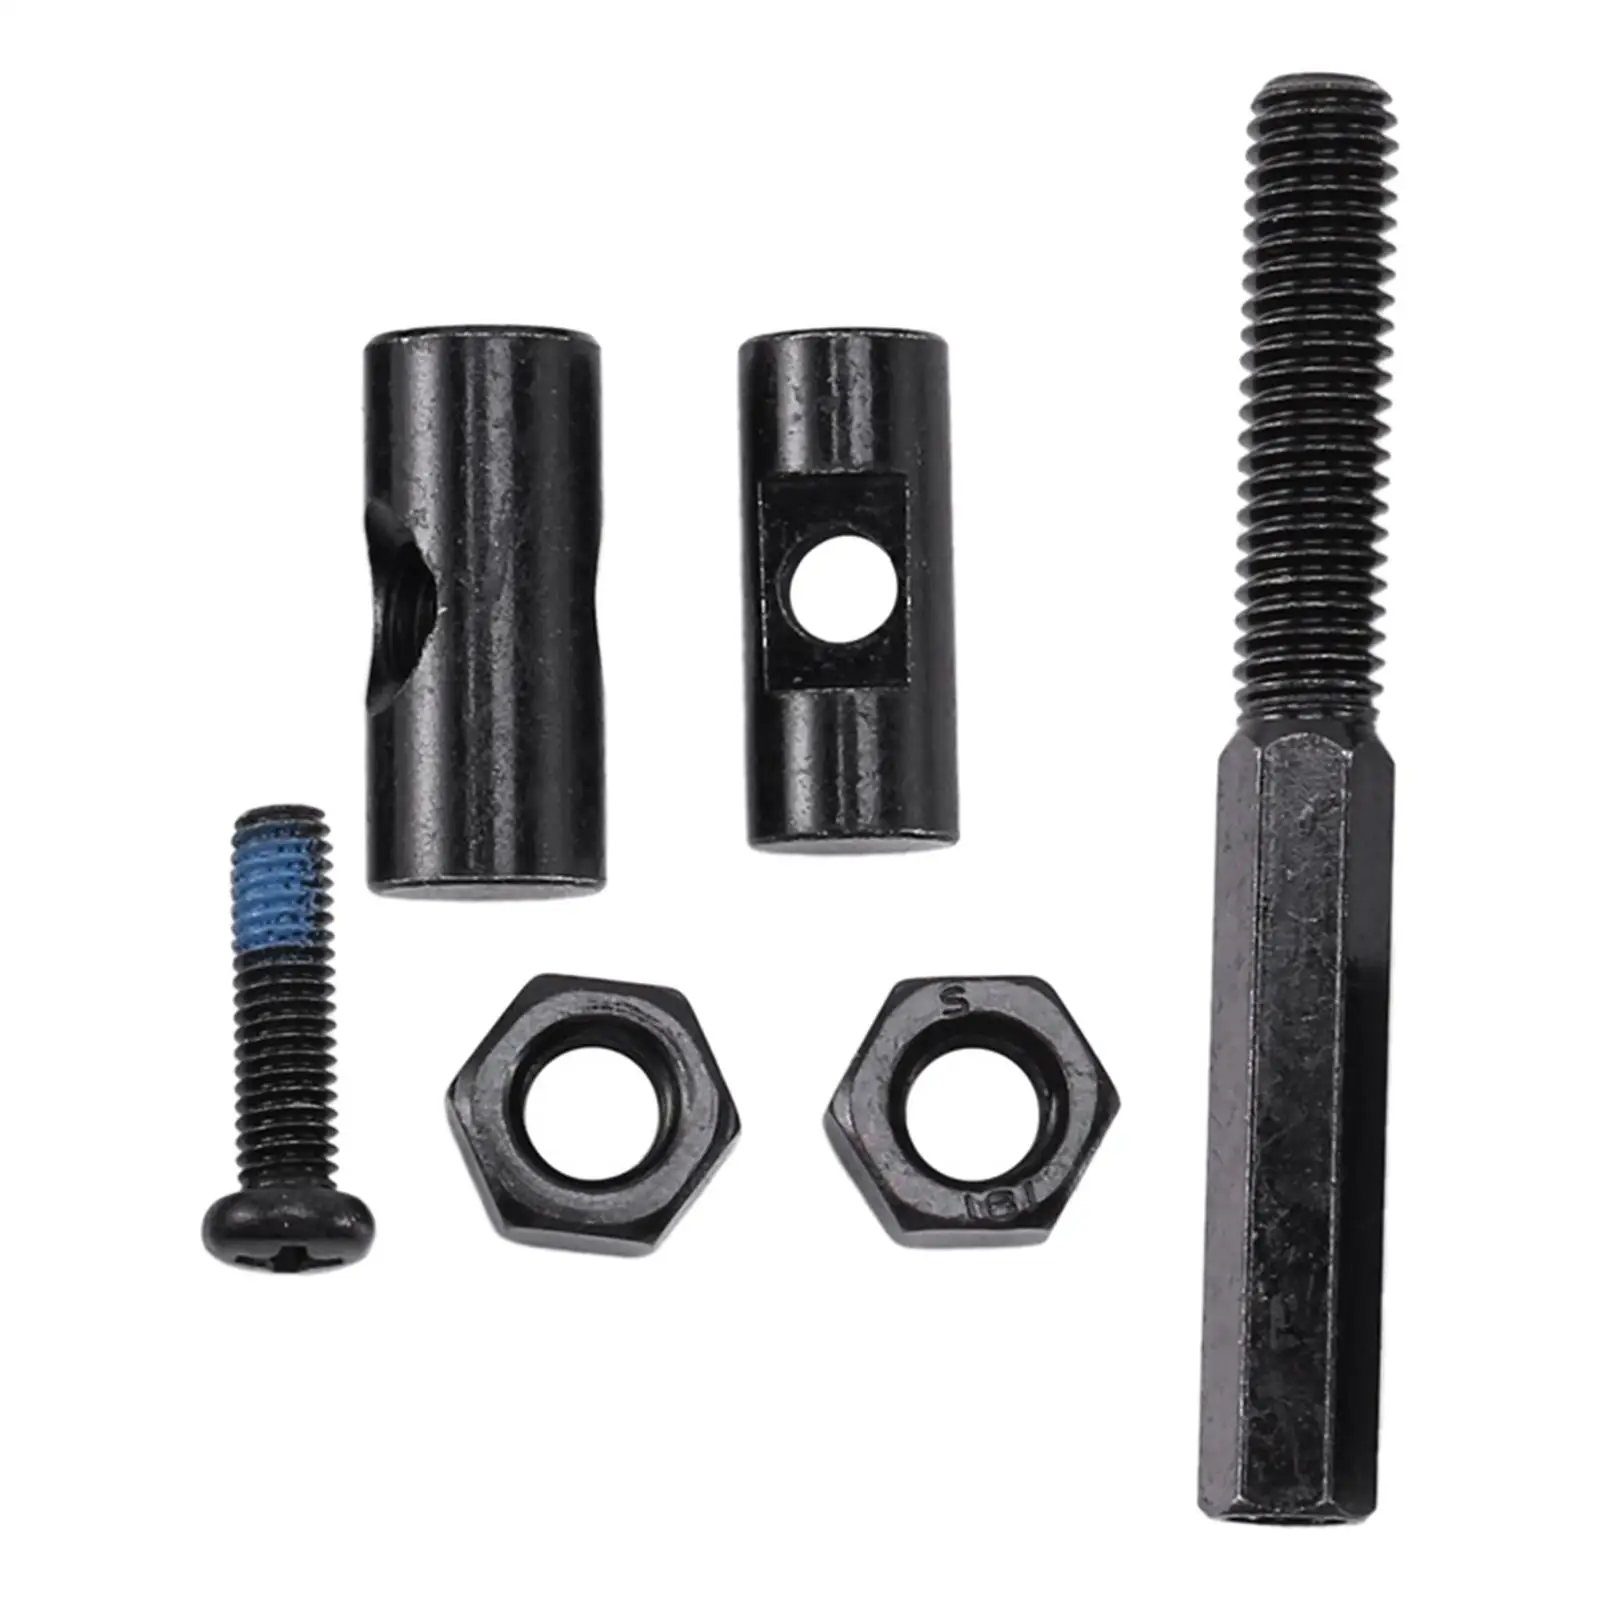 Shaft Locking Screw Wear Resistant Hard Accessories Assembly 